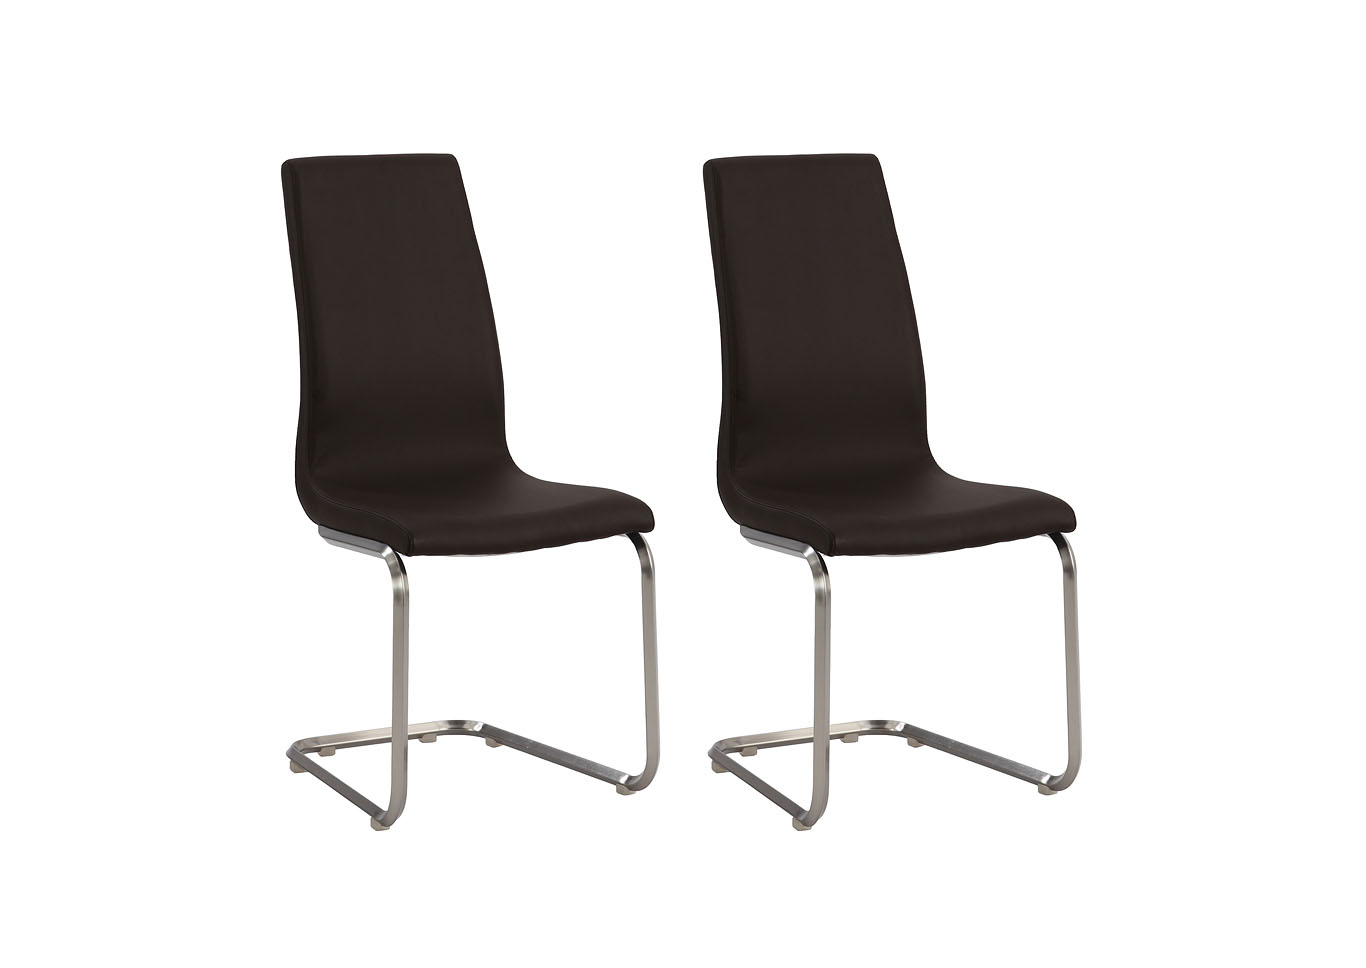 Zoey Brown & Nickel Cantilever High-Back Side Chair (Set of 2),Chintaly Imports